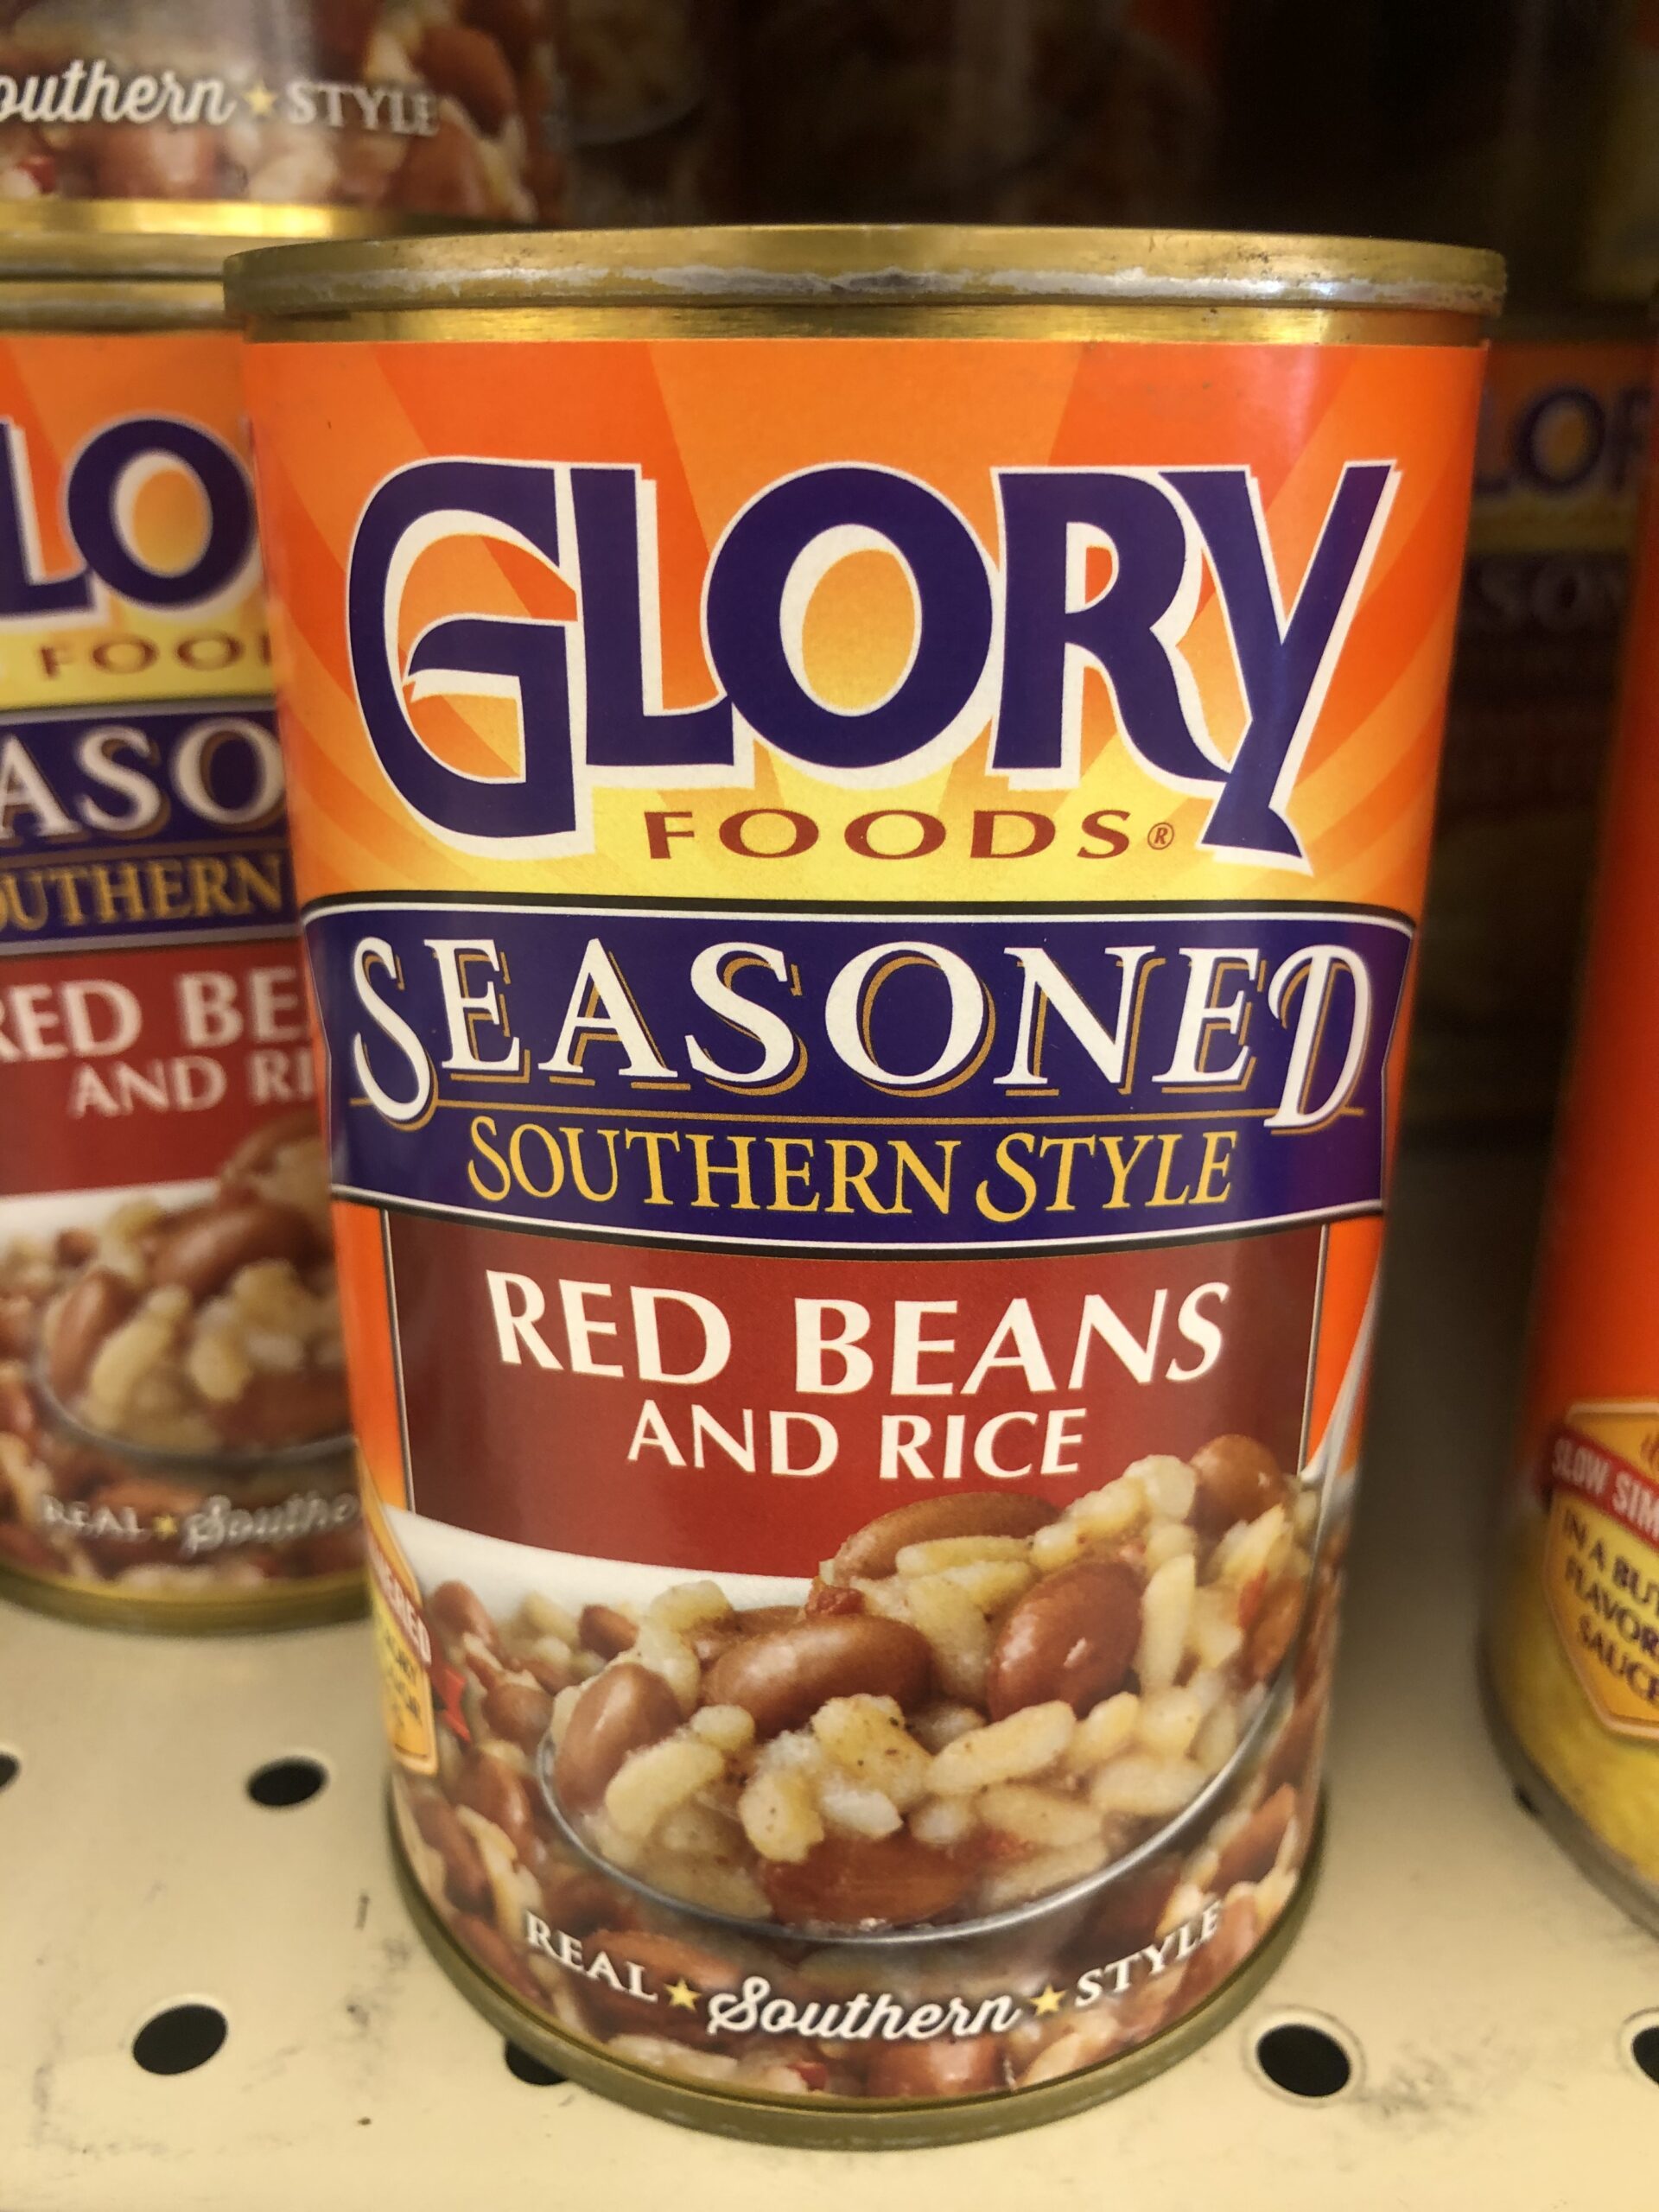 4 CANS Glory Foods Seasoned Southern Style Red Beans and Rice 15 oz Can ...